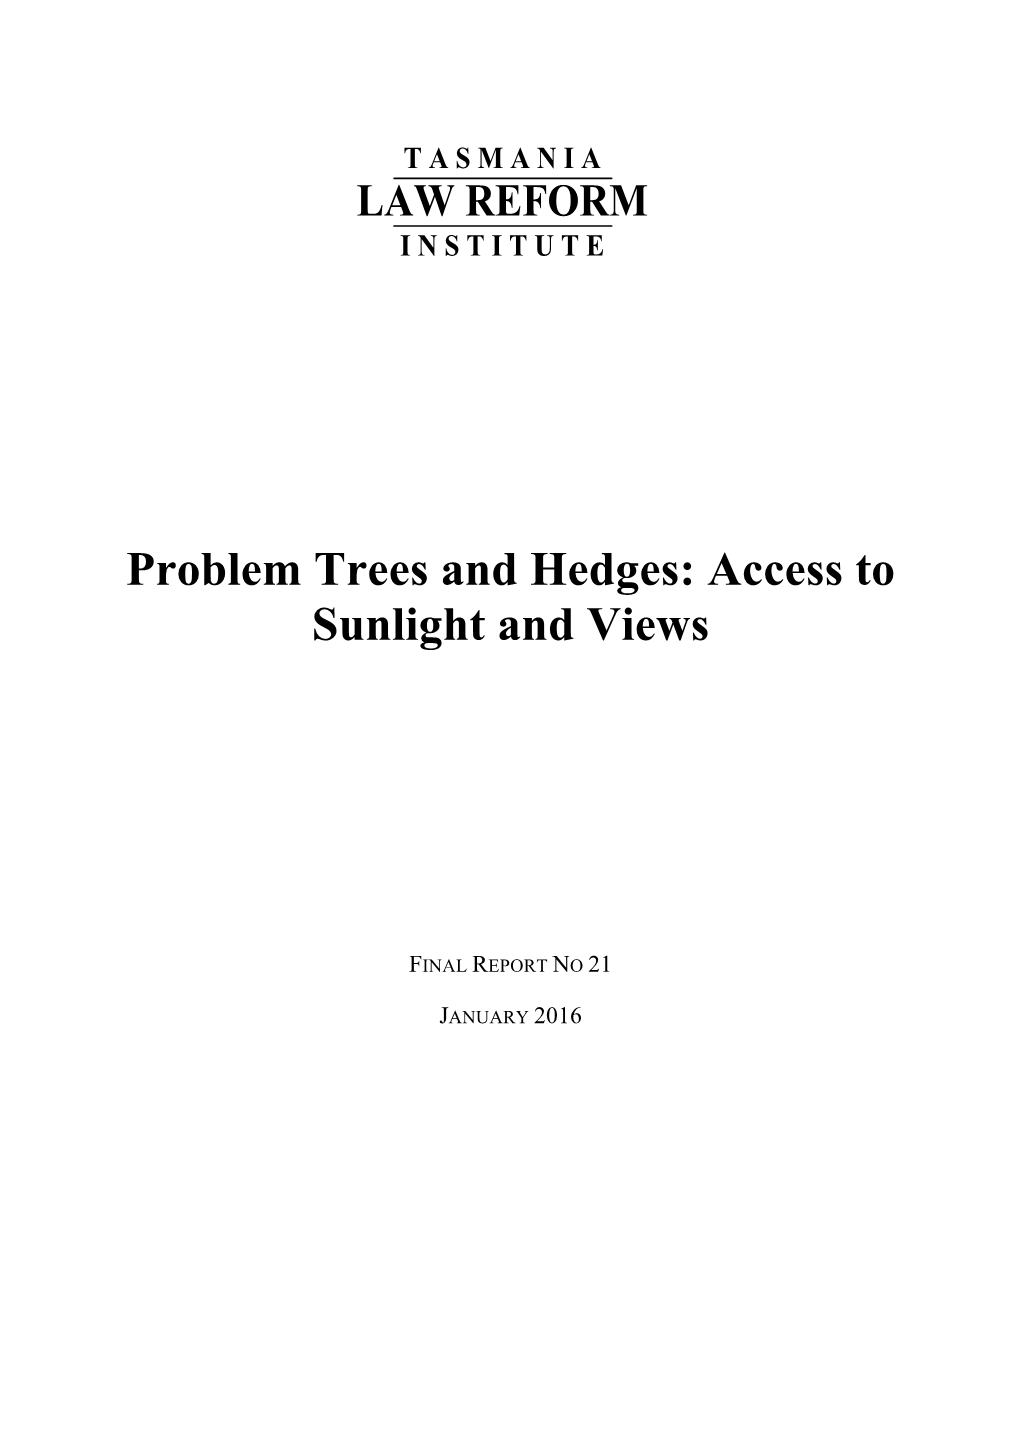 Problem Trees and Hedges: Access to Sunlight and Views